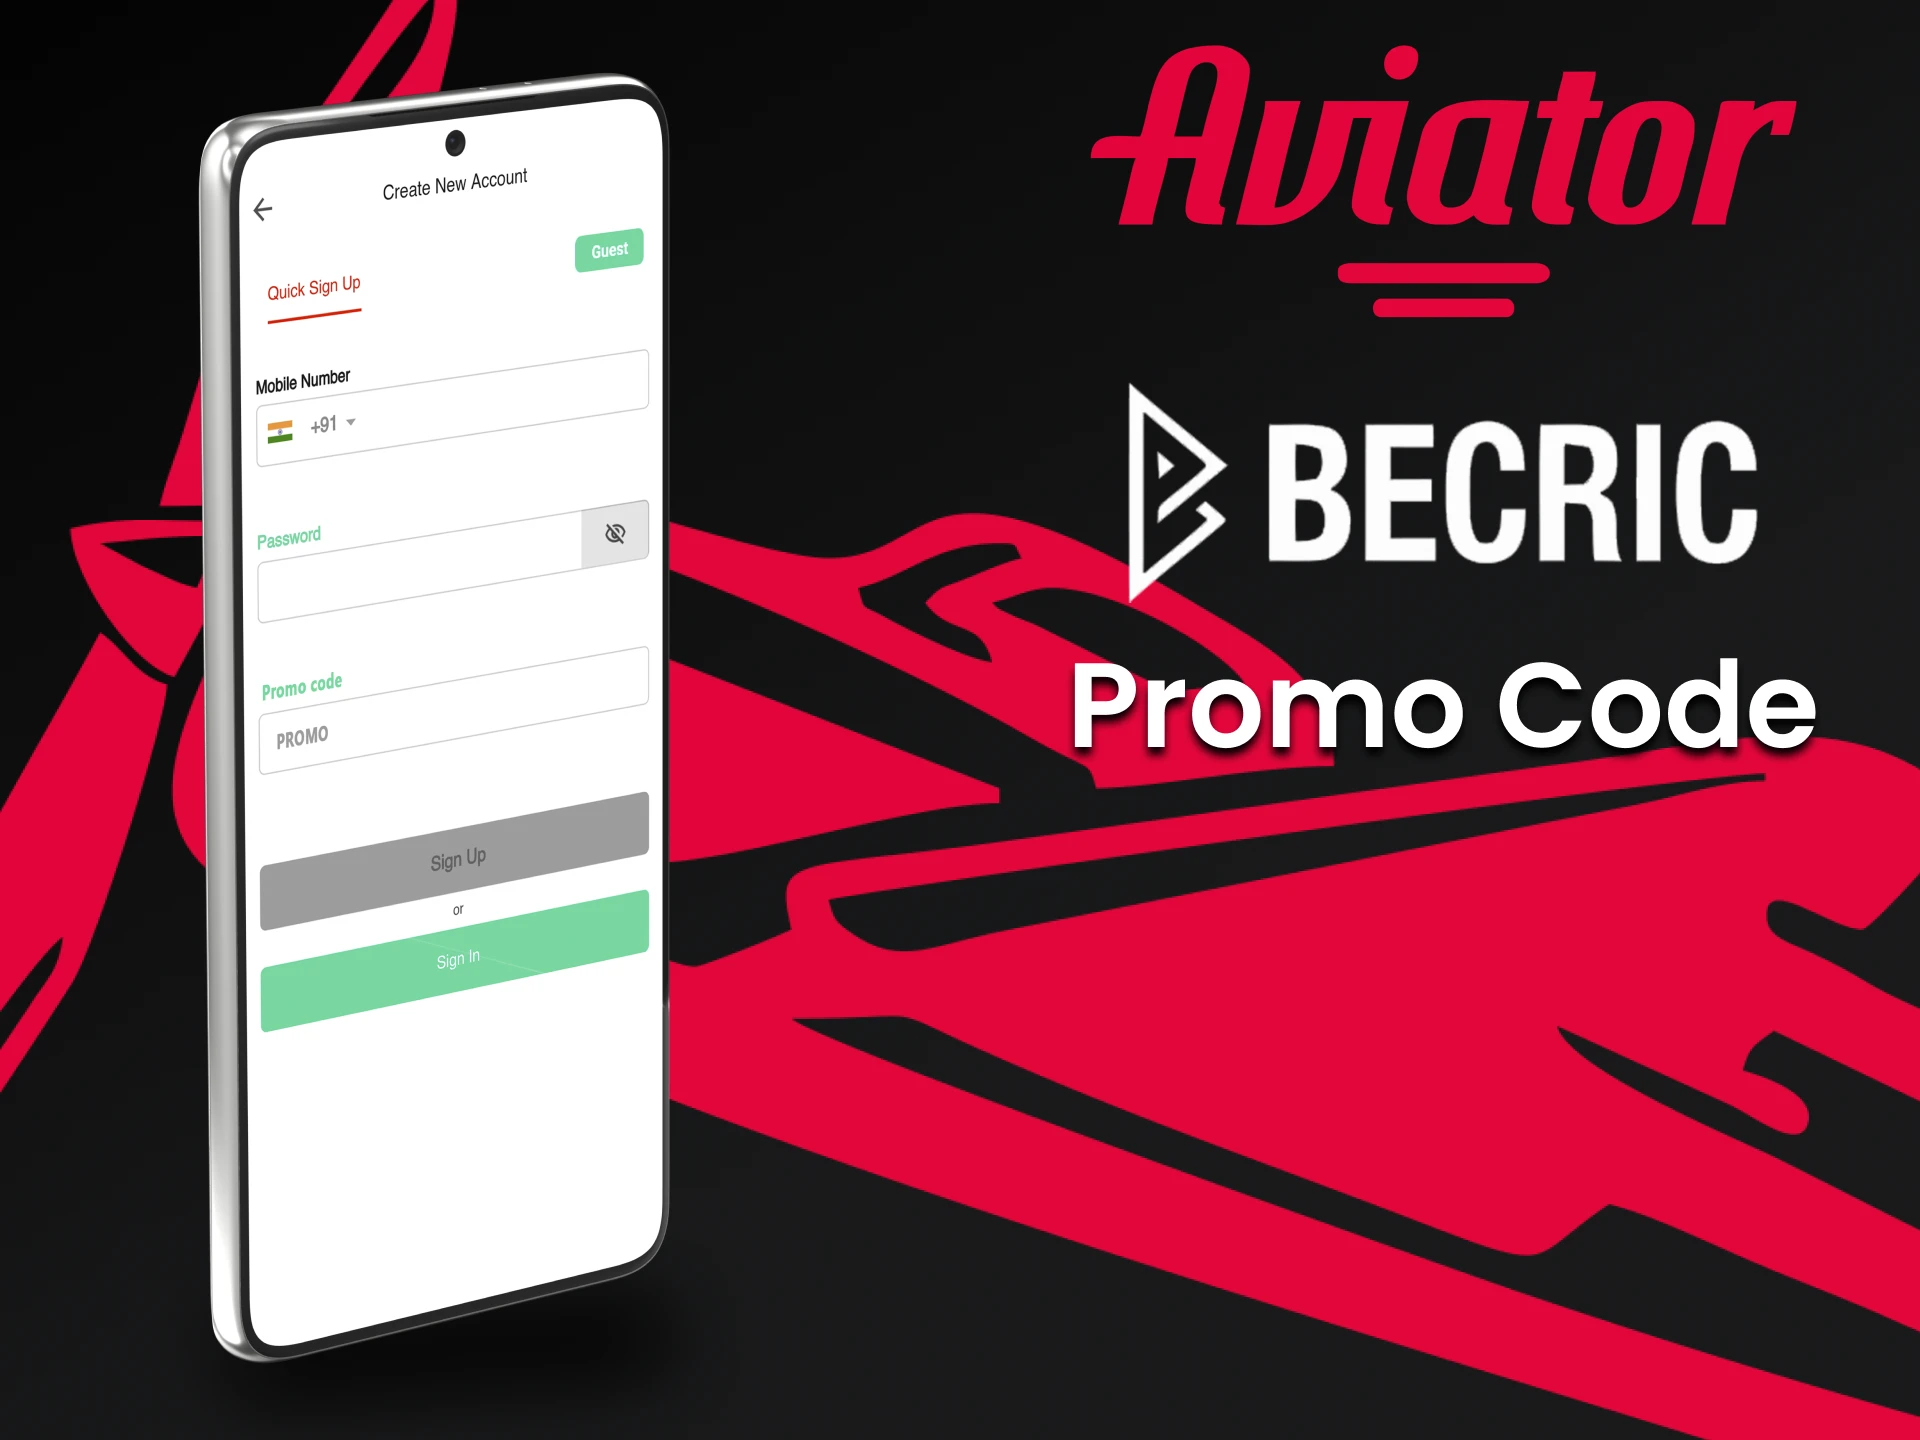 Use the promo code from Becric to get a bonus.